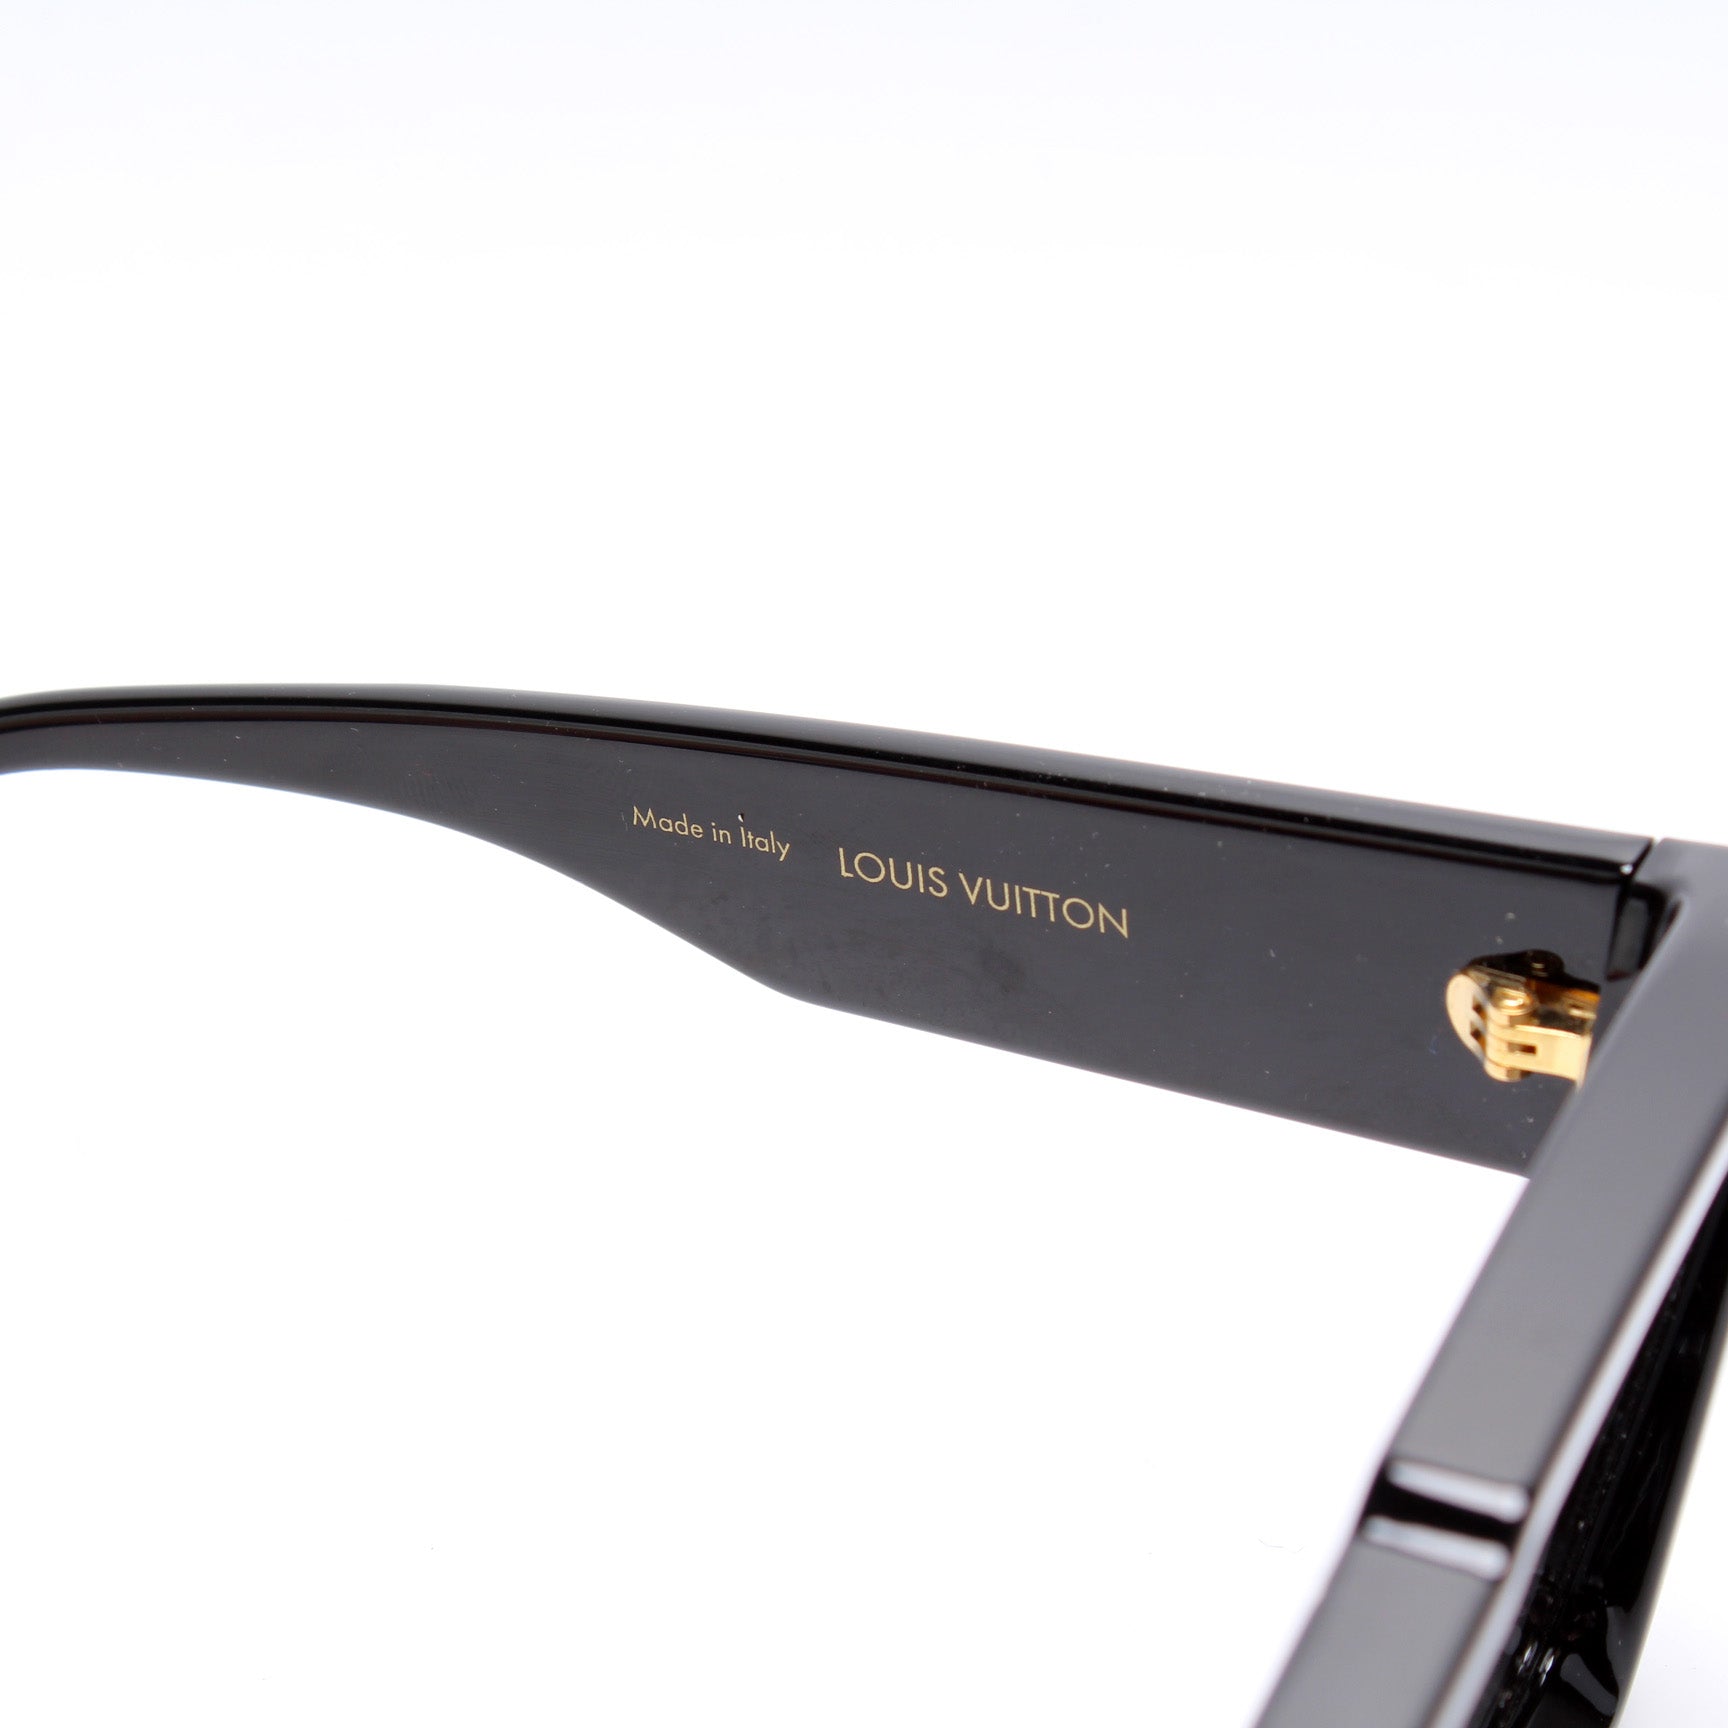 Cyclone Sunglasses - Luxury OBSOLETES DO NOT TOUCH 7 - OBSOLETES DO NOT  TOUCH, Men Z1642E